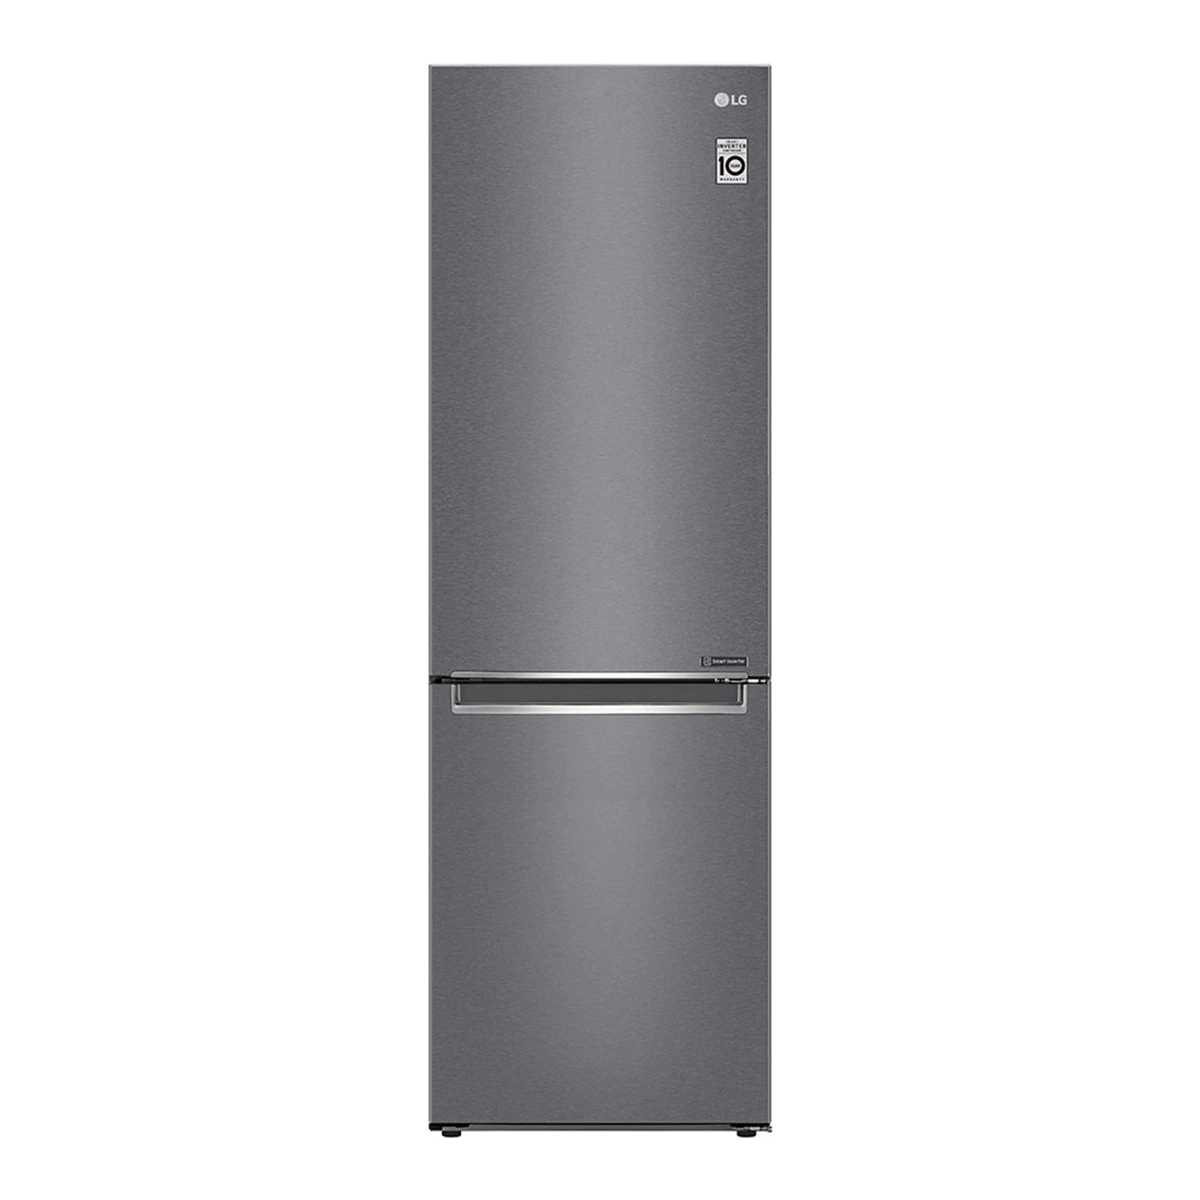 Frigorífico combi LG GBP61DSPFN Total No Frost